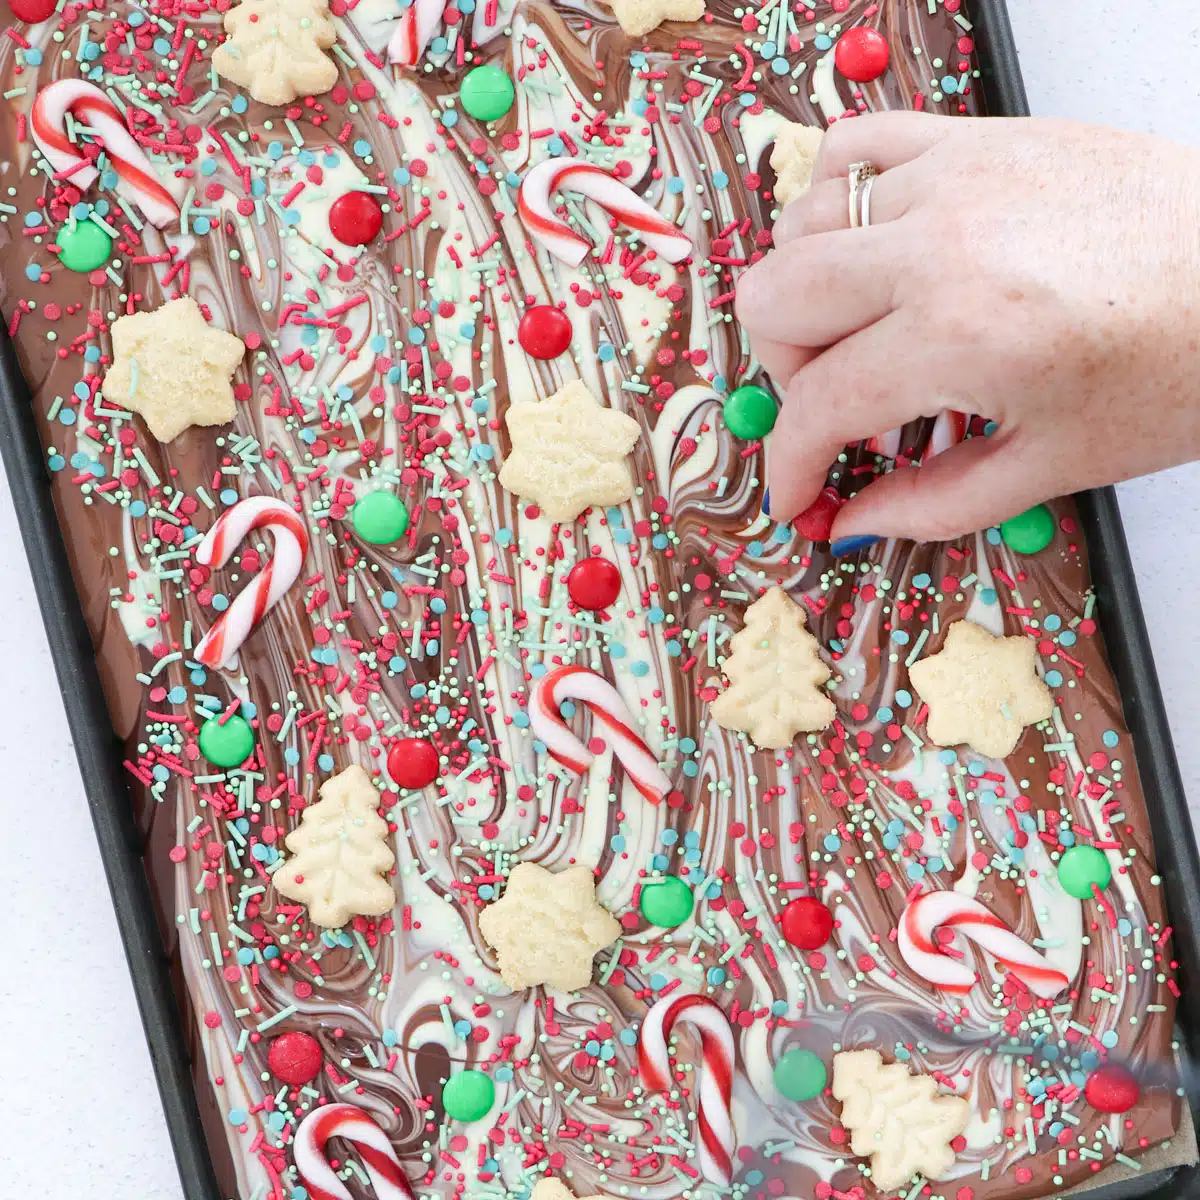 A white hand is decorating swirled chocolate bark with shortbread, candy canes, sprinkles and chocolate buds.